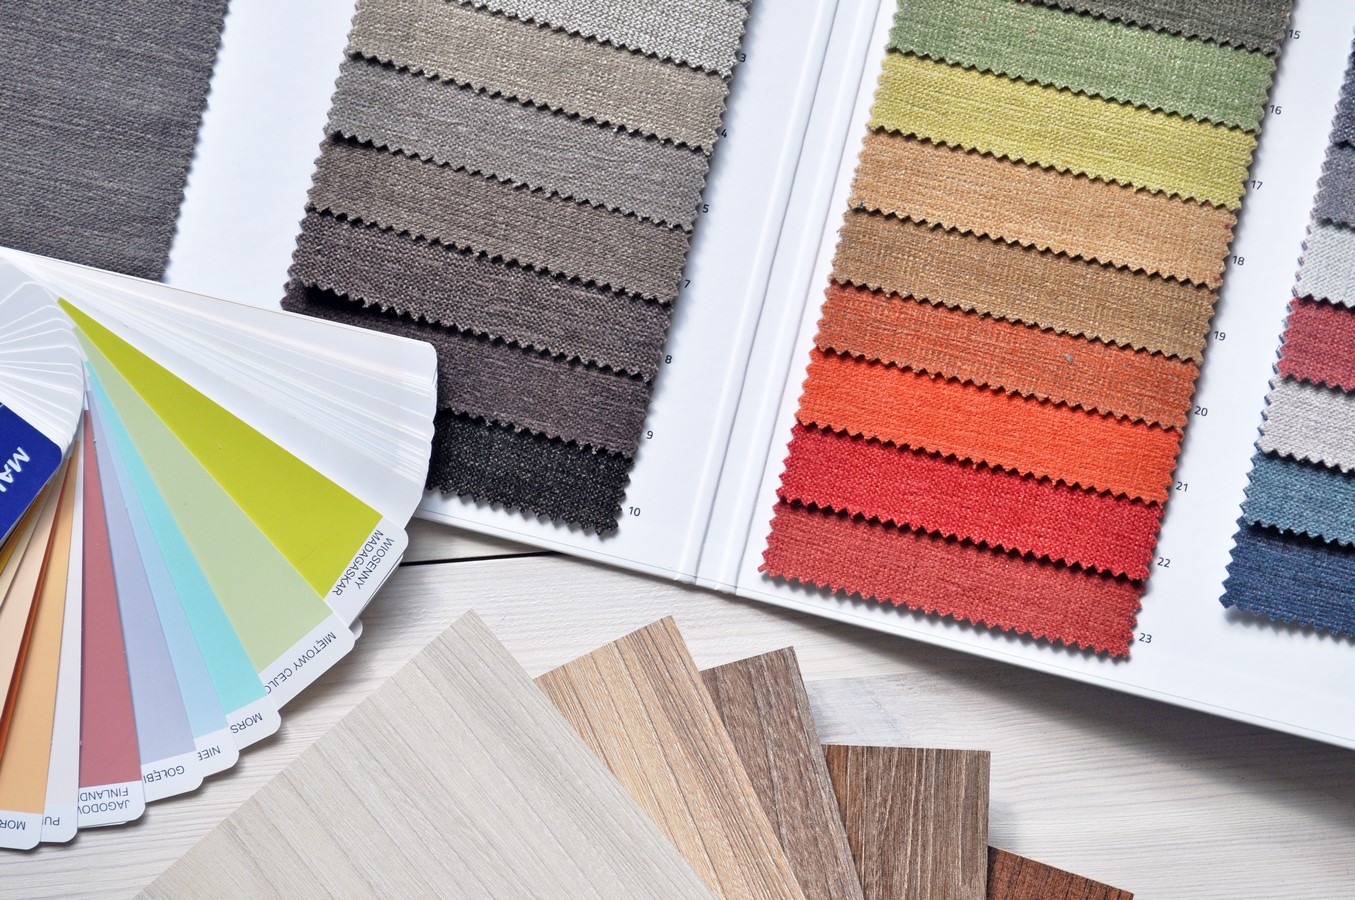 How to select the right color scheme for your home - Sheet1